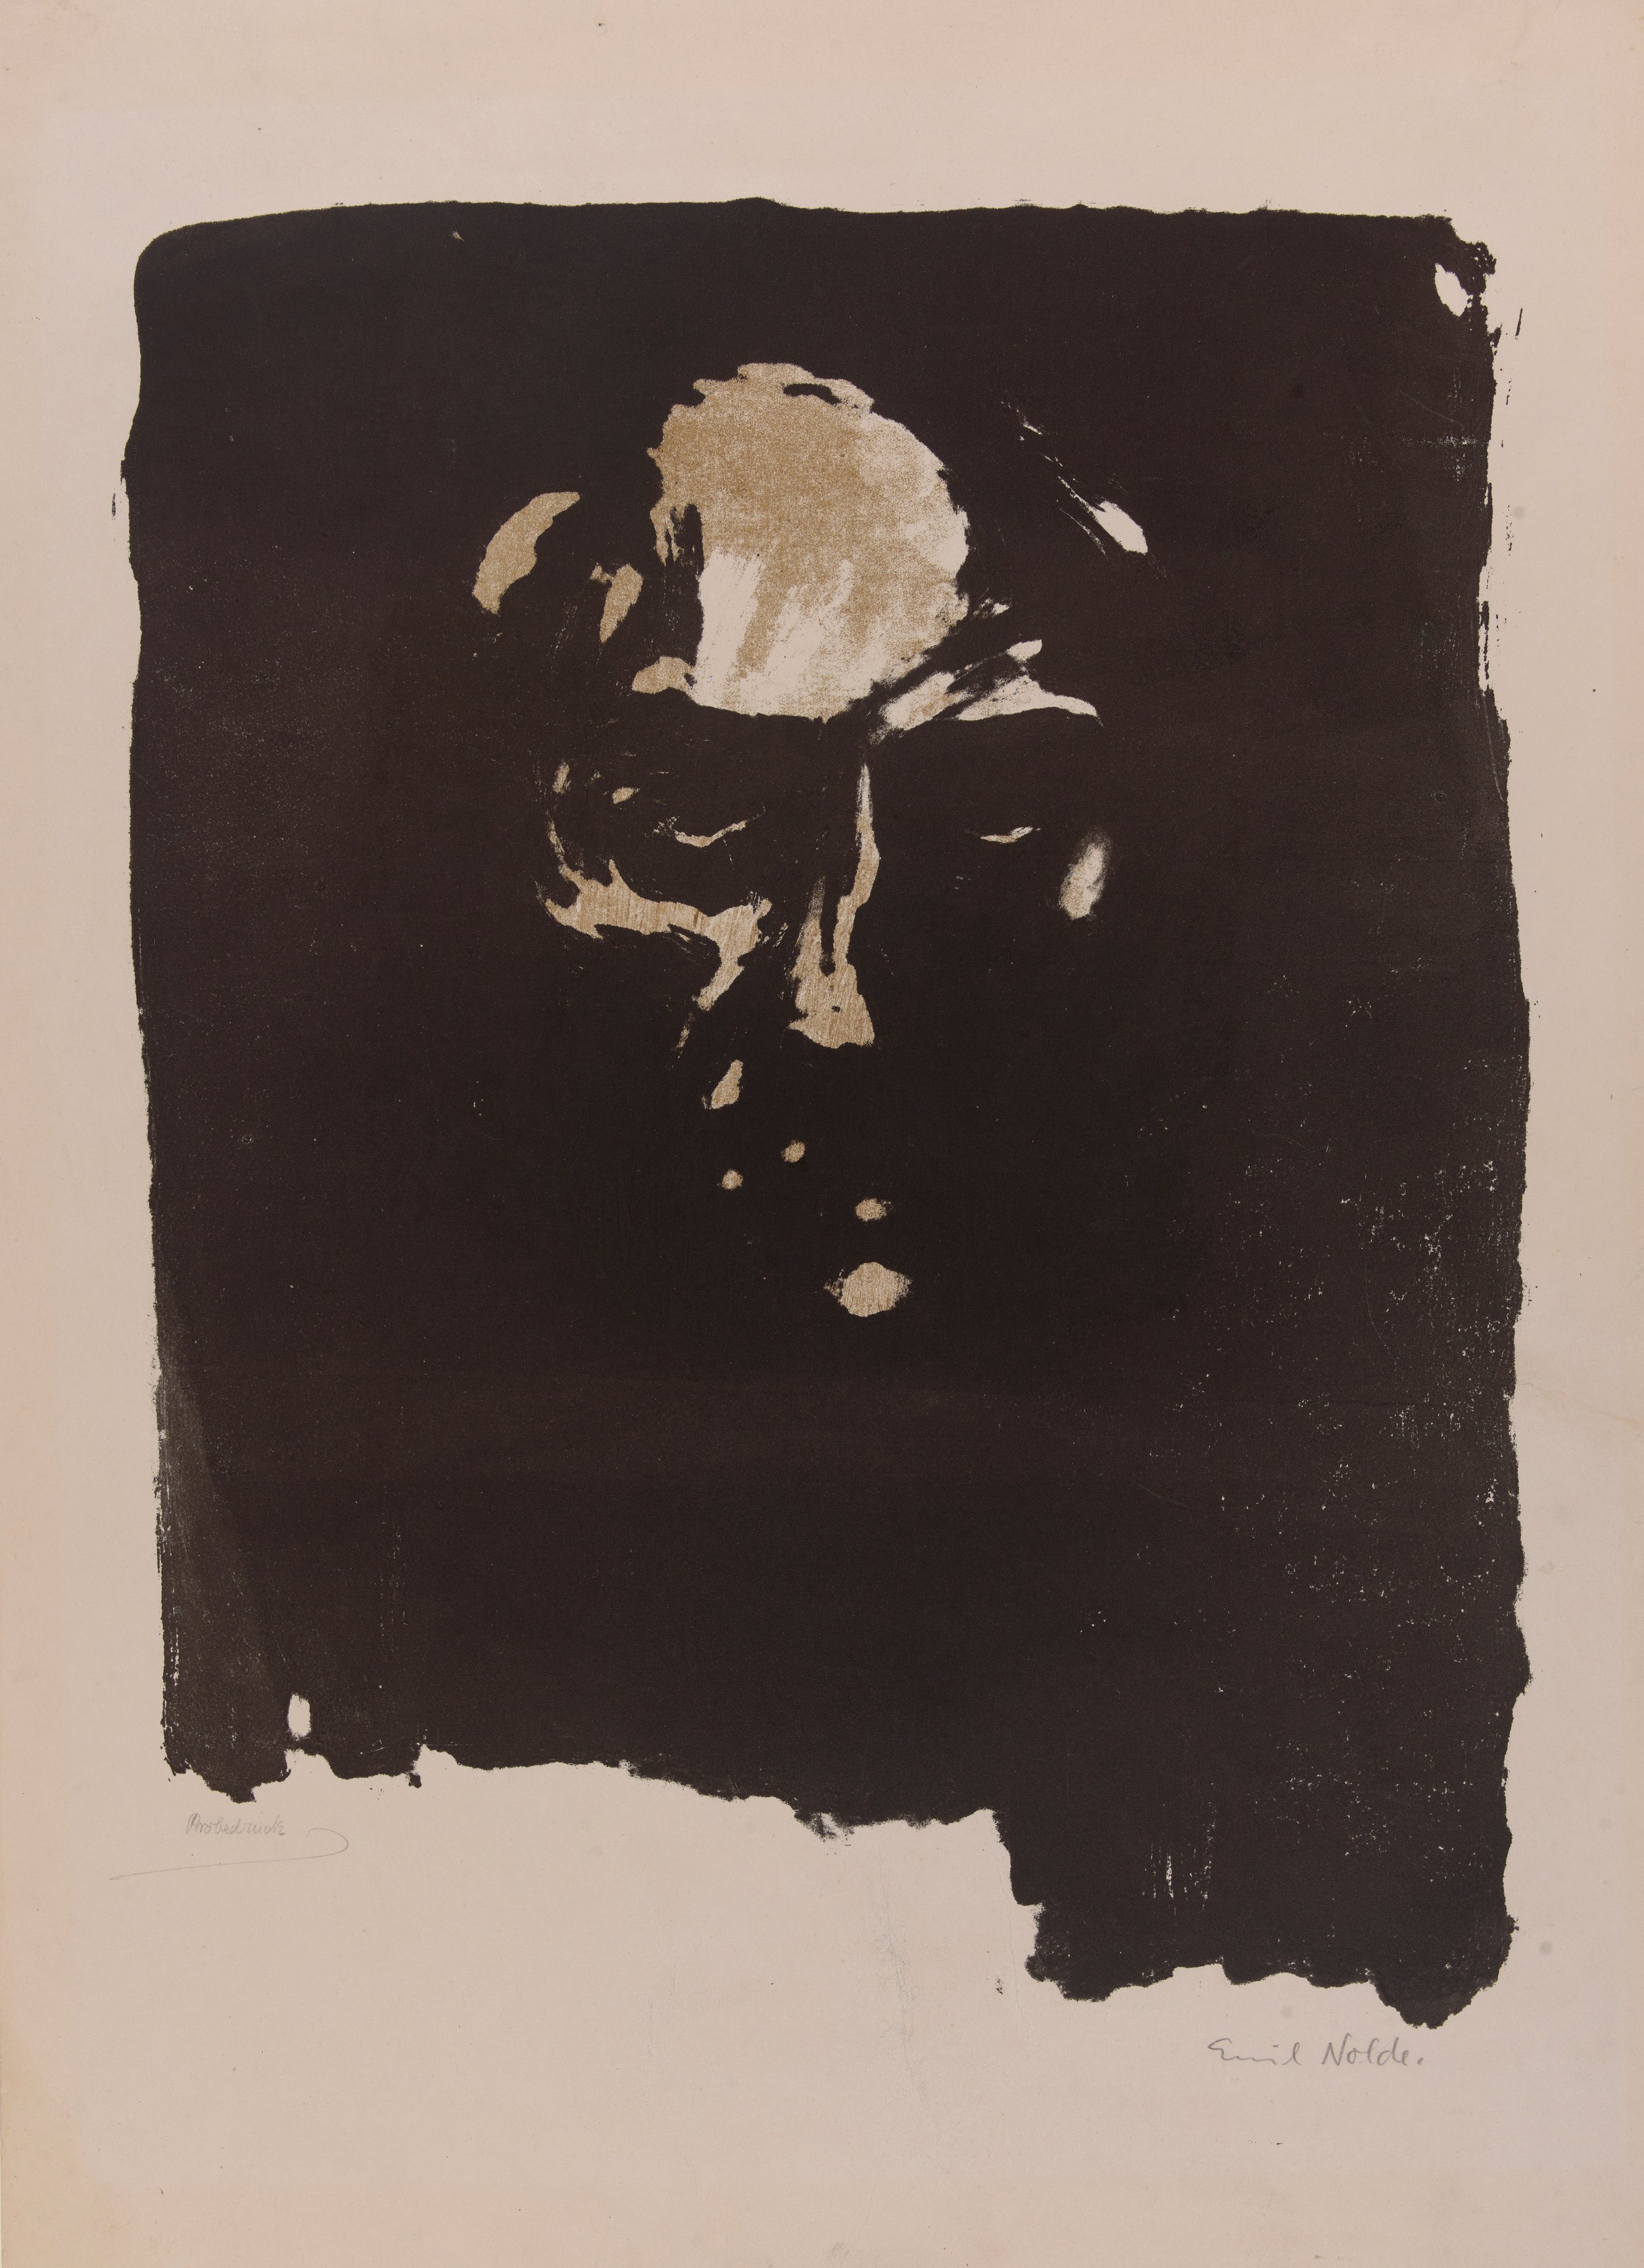   Emil Nolde  Germany, 1867–1956  Düsterer Männerkopf&nbsp; (Somber Head of a Man),  1907-1915 lithograph printed in black and brown on wove paper, 22 7/8 x 16 inches Gift of David and Eva Bradford, 2022.18.18 